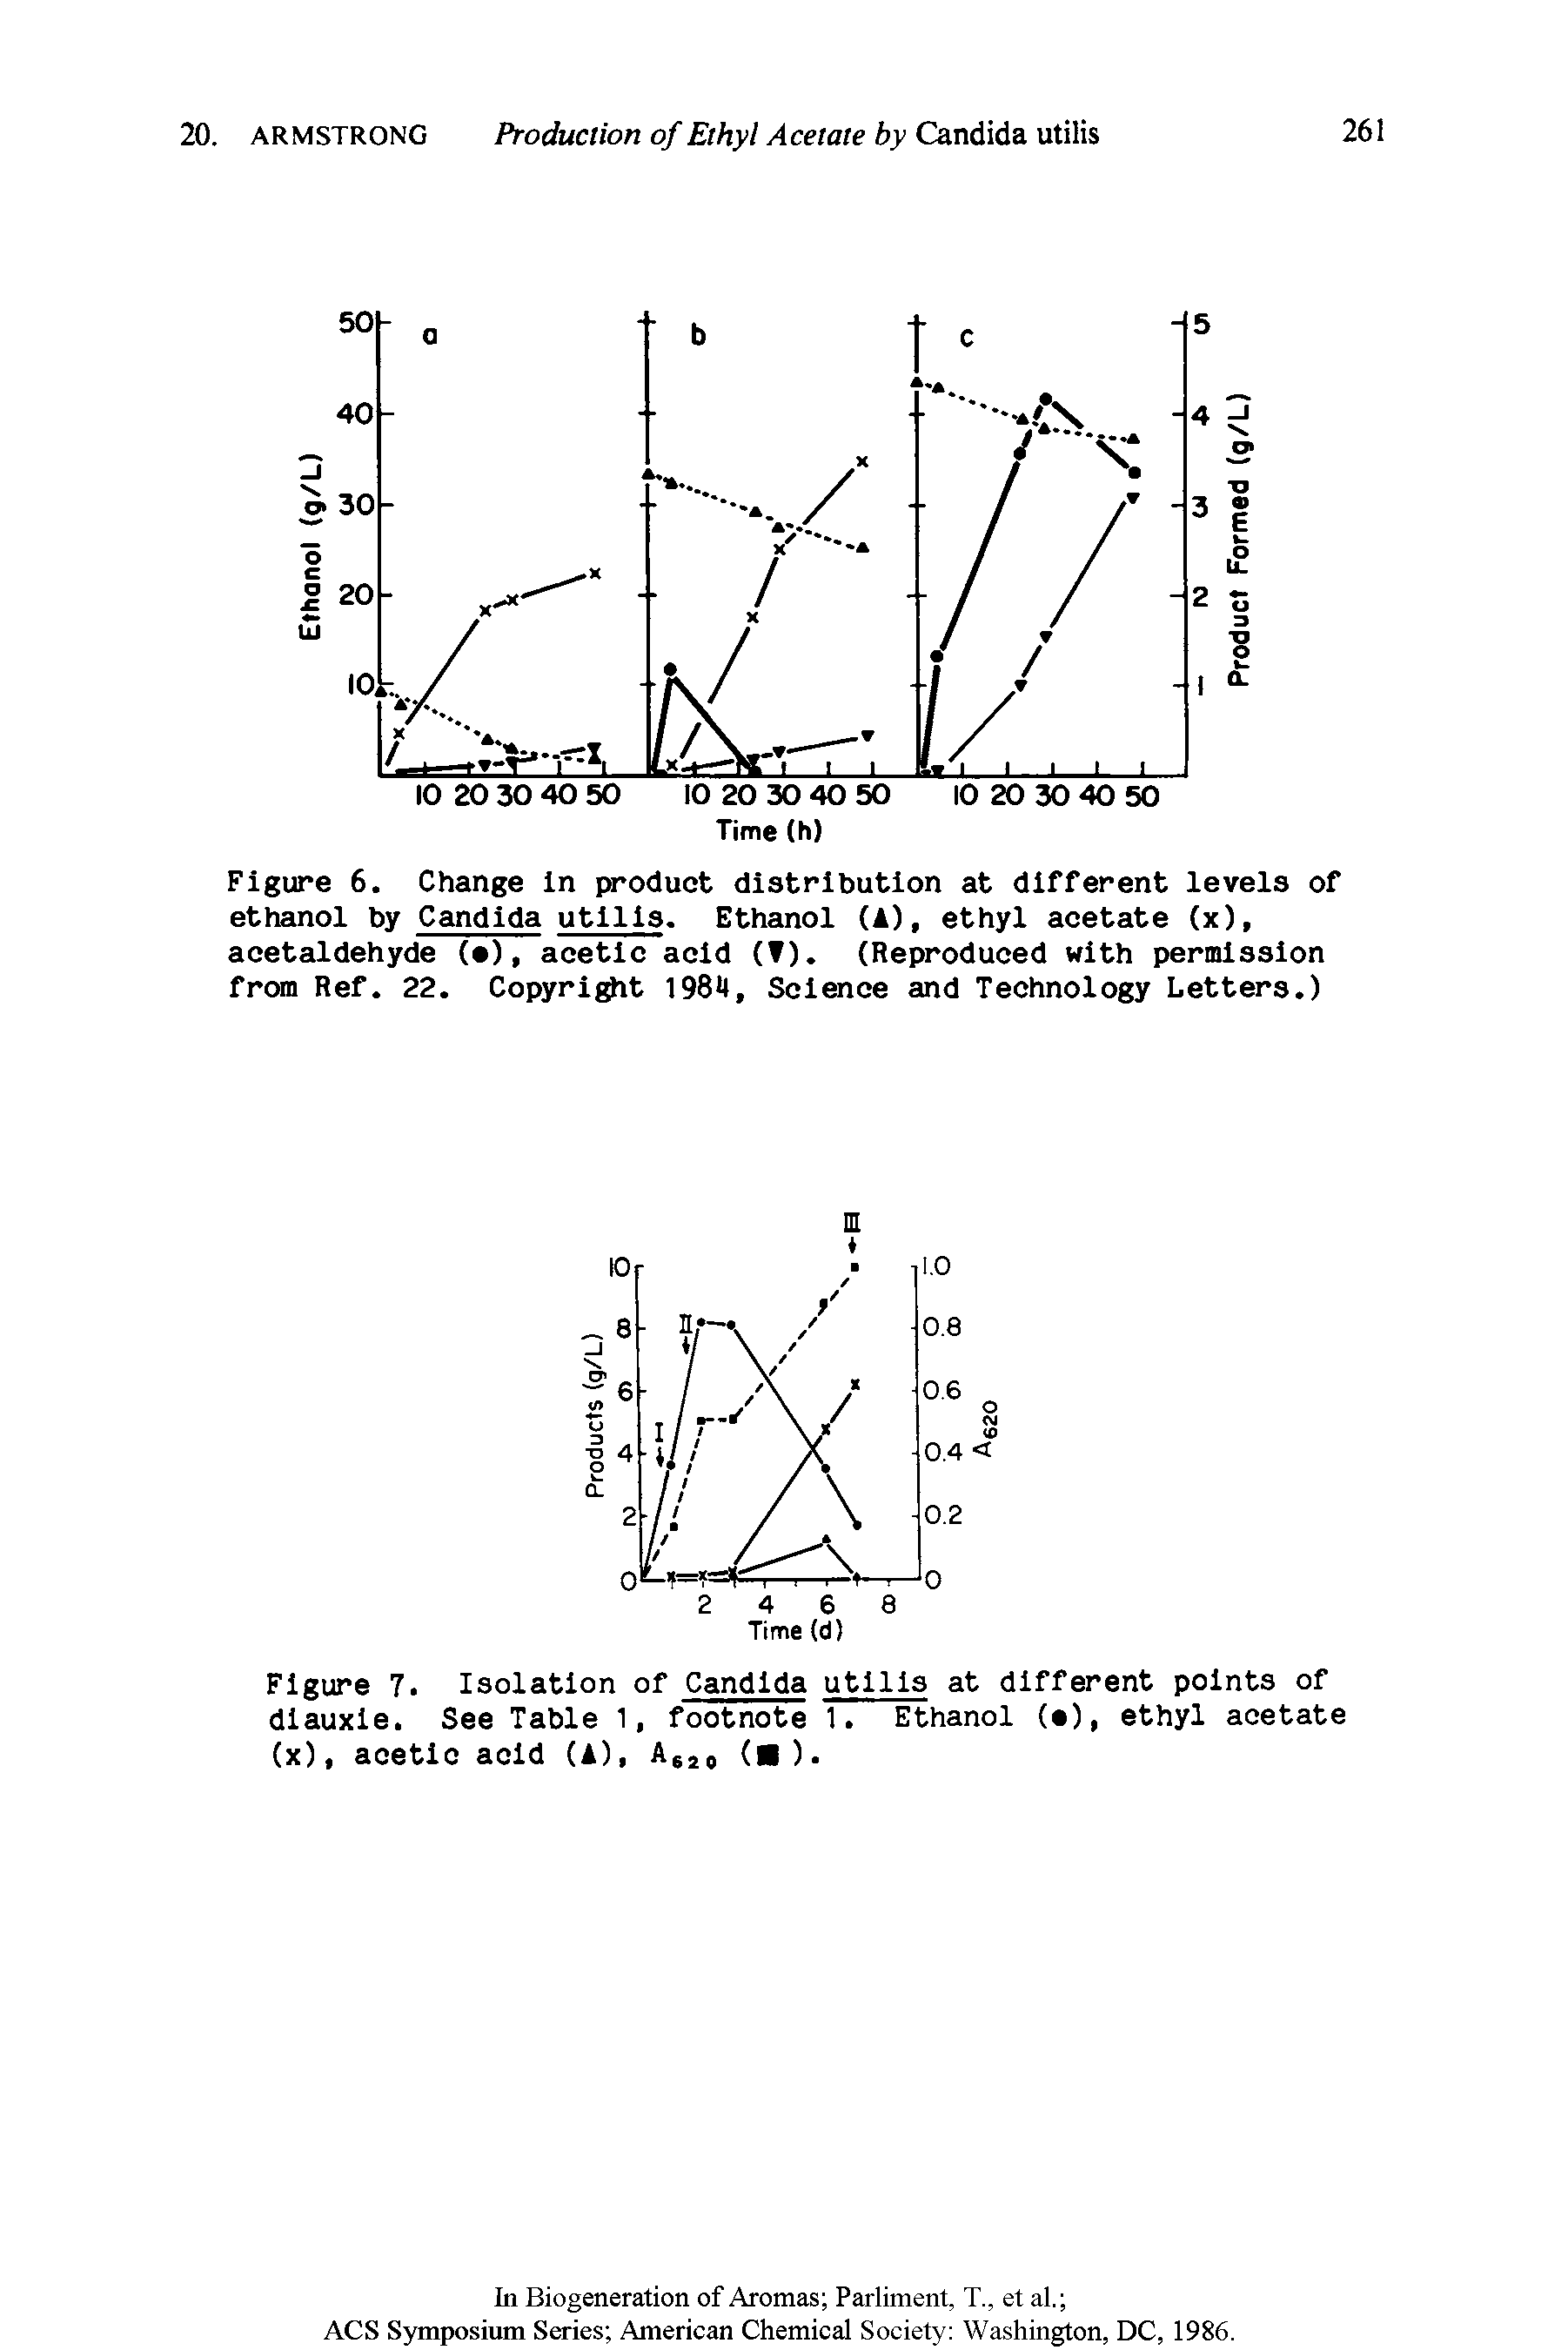 Figure 6. Change in product distribution at different levels of ethanol by Candida utilis. Ethanol (A), ethyl acetate (x), acetaldehyde ( ), acetic acid (T). (Reproduced with permission from Ref. 22. Copyright 1984, Science and Technology Letters.)...